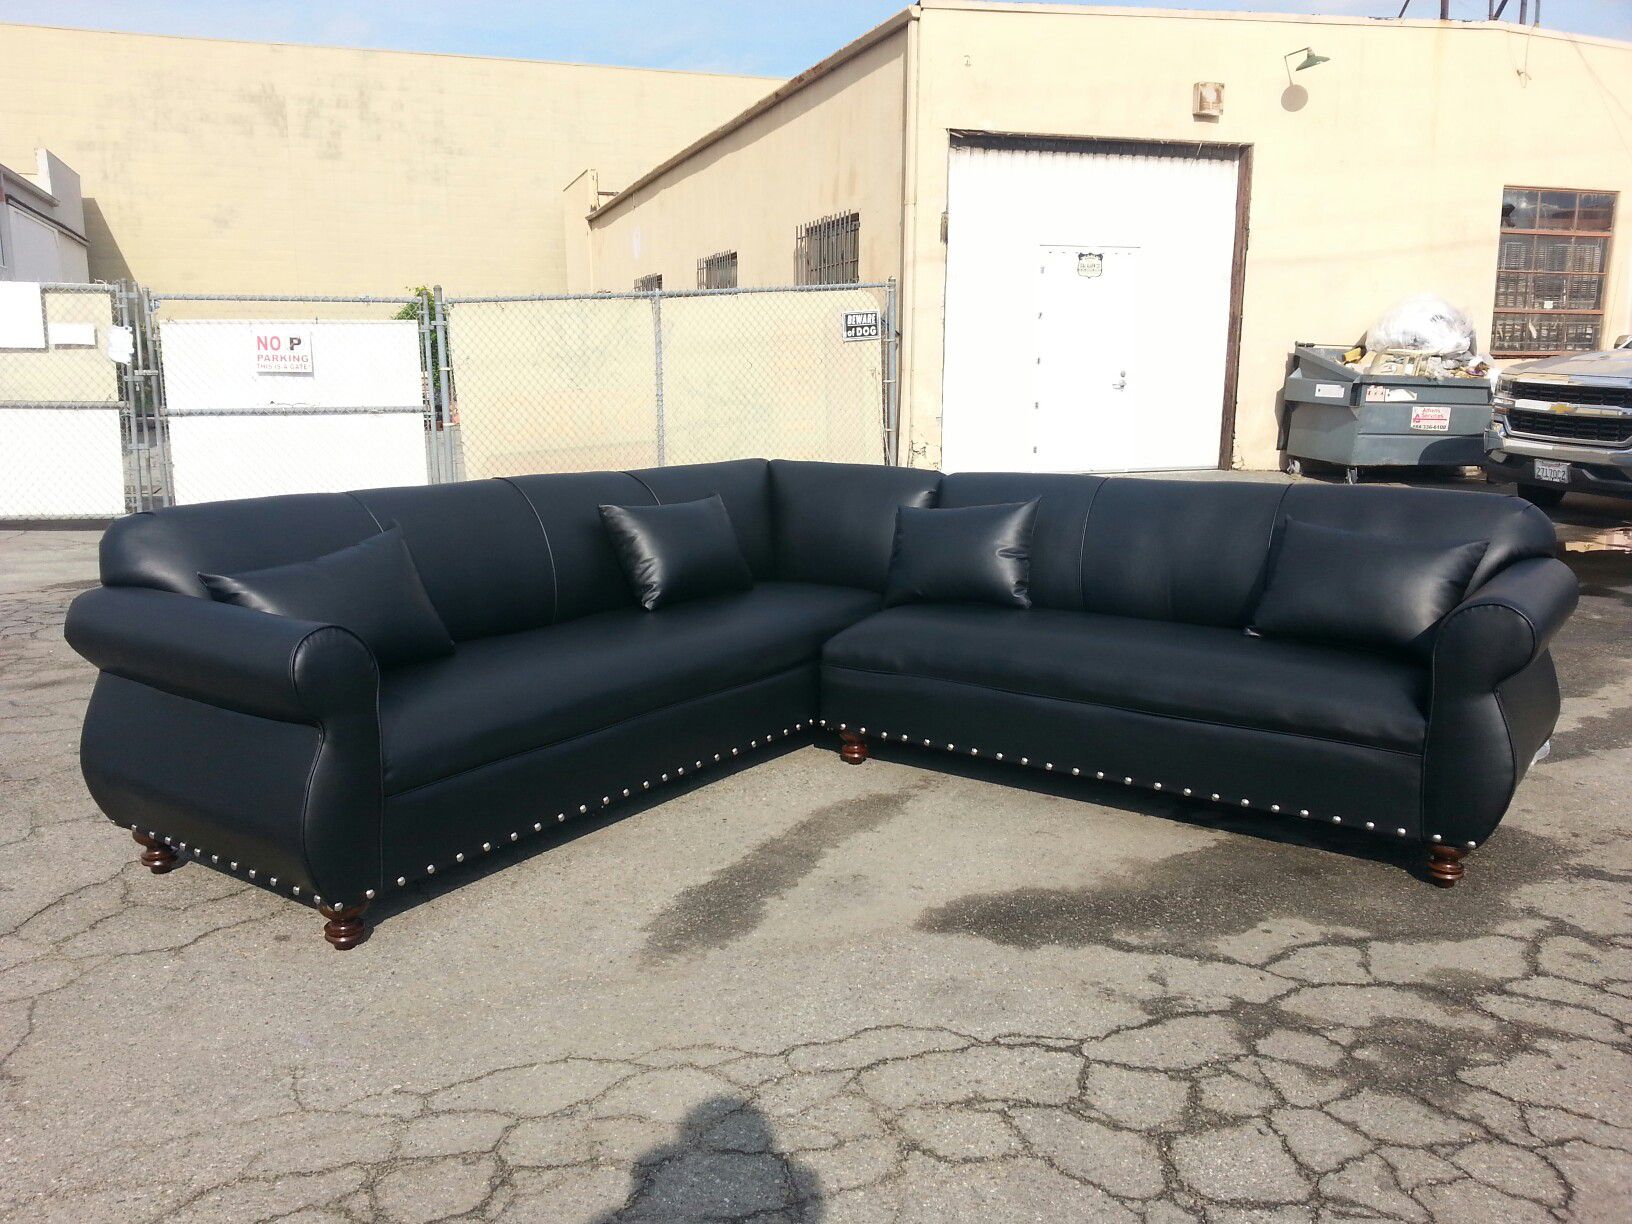 NEW 9X9FT BLACK LEATHER COMBO SECTIONAL COUCHES